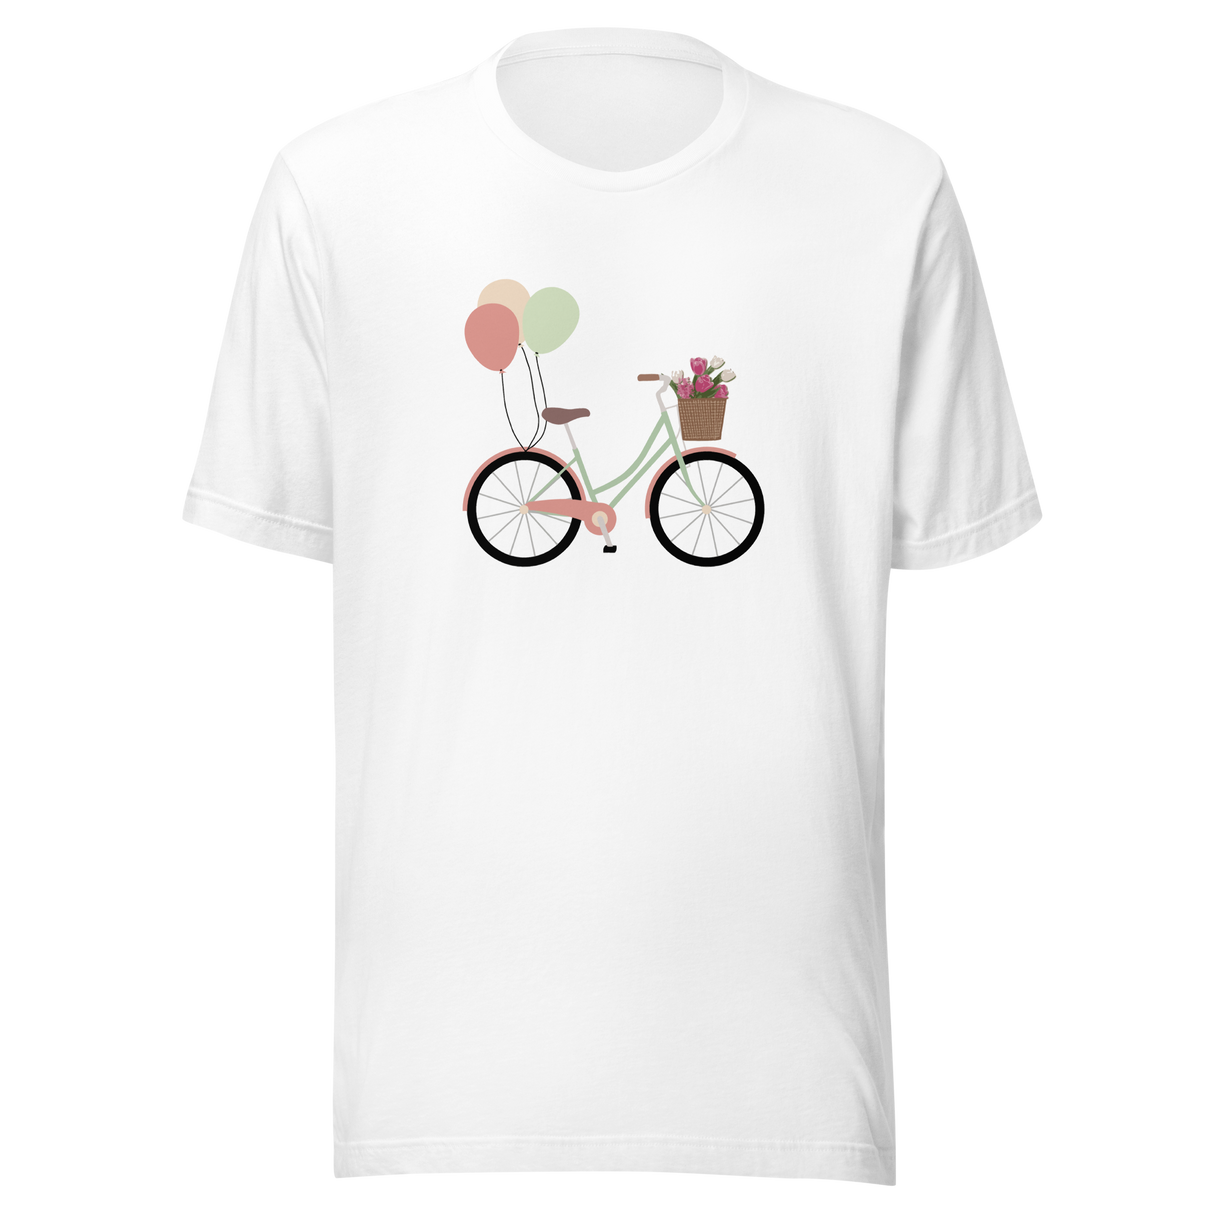 bicycle-with-flowers-in-front-basket-and-balloons-tied-to-back-bicycle-tee-bike-t-shirt-balloons-tee-gift-t-shirt-mom-tee#color_white